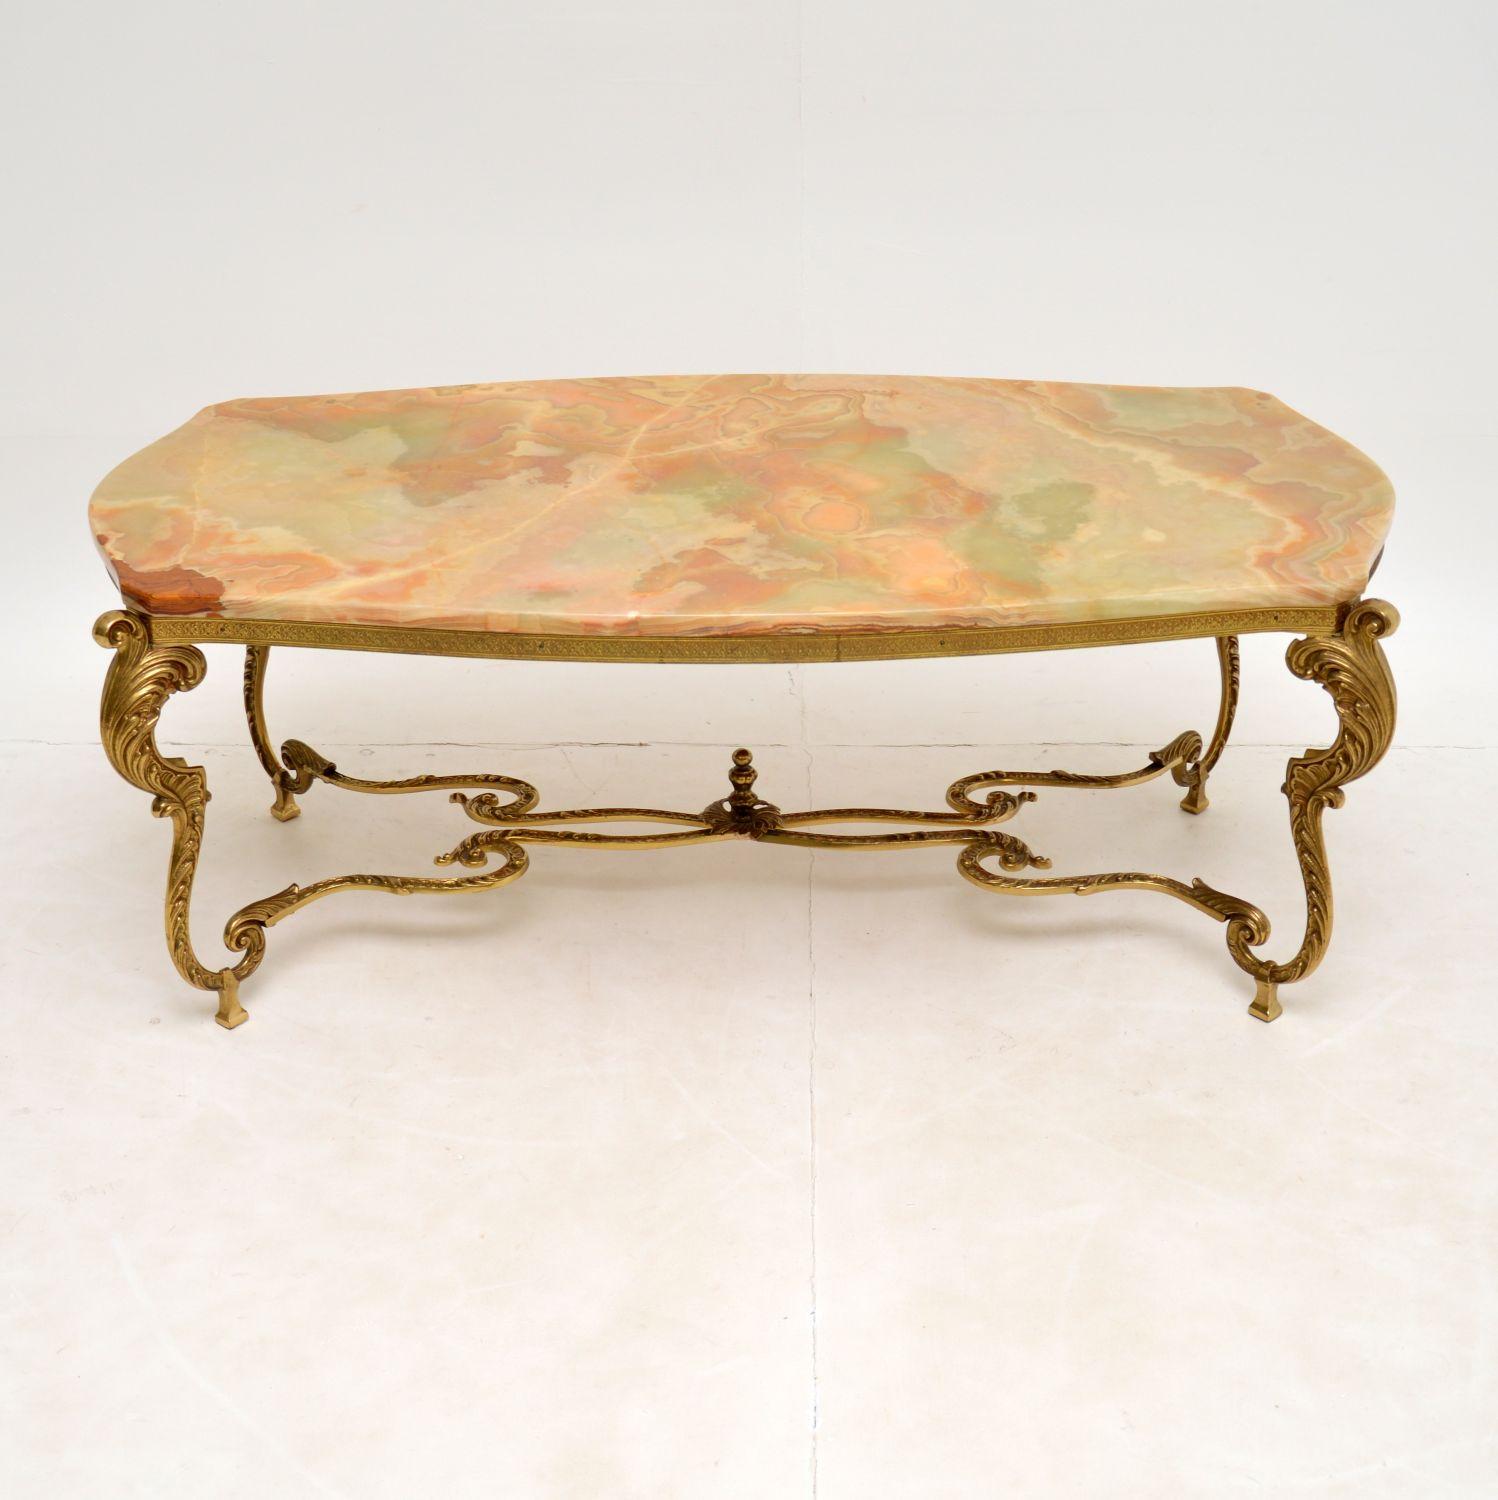 A stunning antique coffee table with a gorgeous brass frame and shaped onyx top. This was made in France, it dates from around the 1920-30’s.

The quality is amazing, this has a fantastically detailed solid brass frame which has such a beautiful